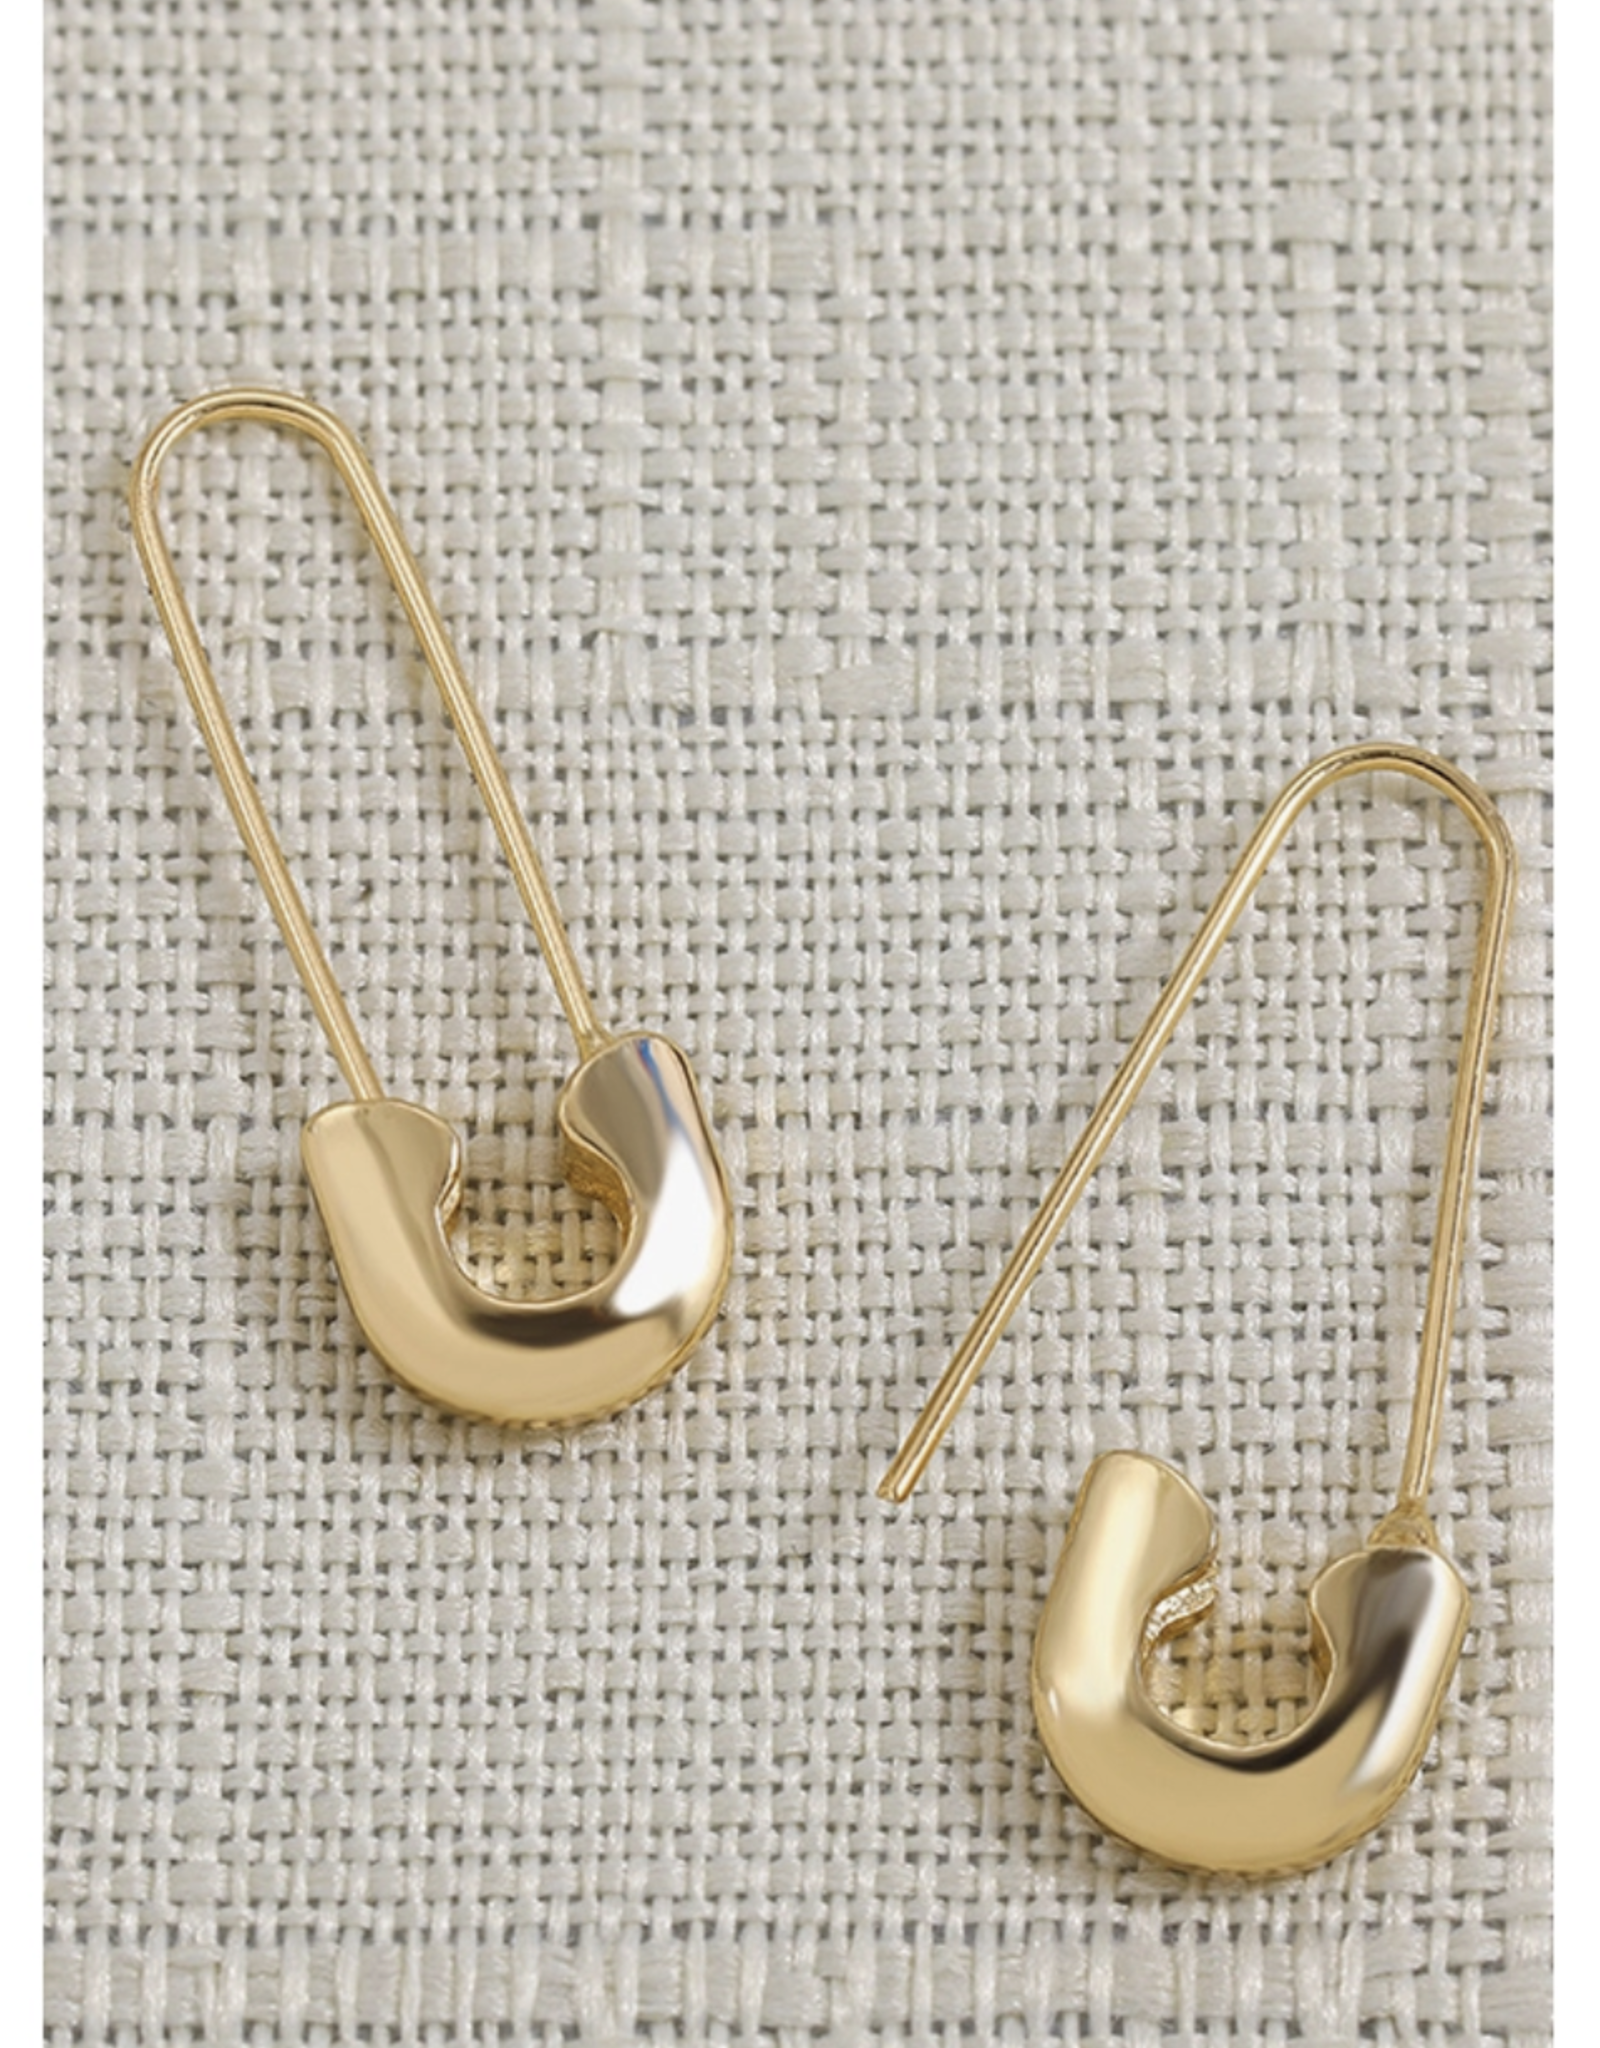 ESLEY Stylish Paper Clip Gold Earrings